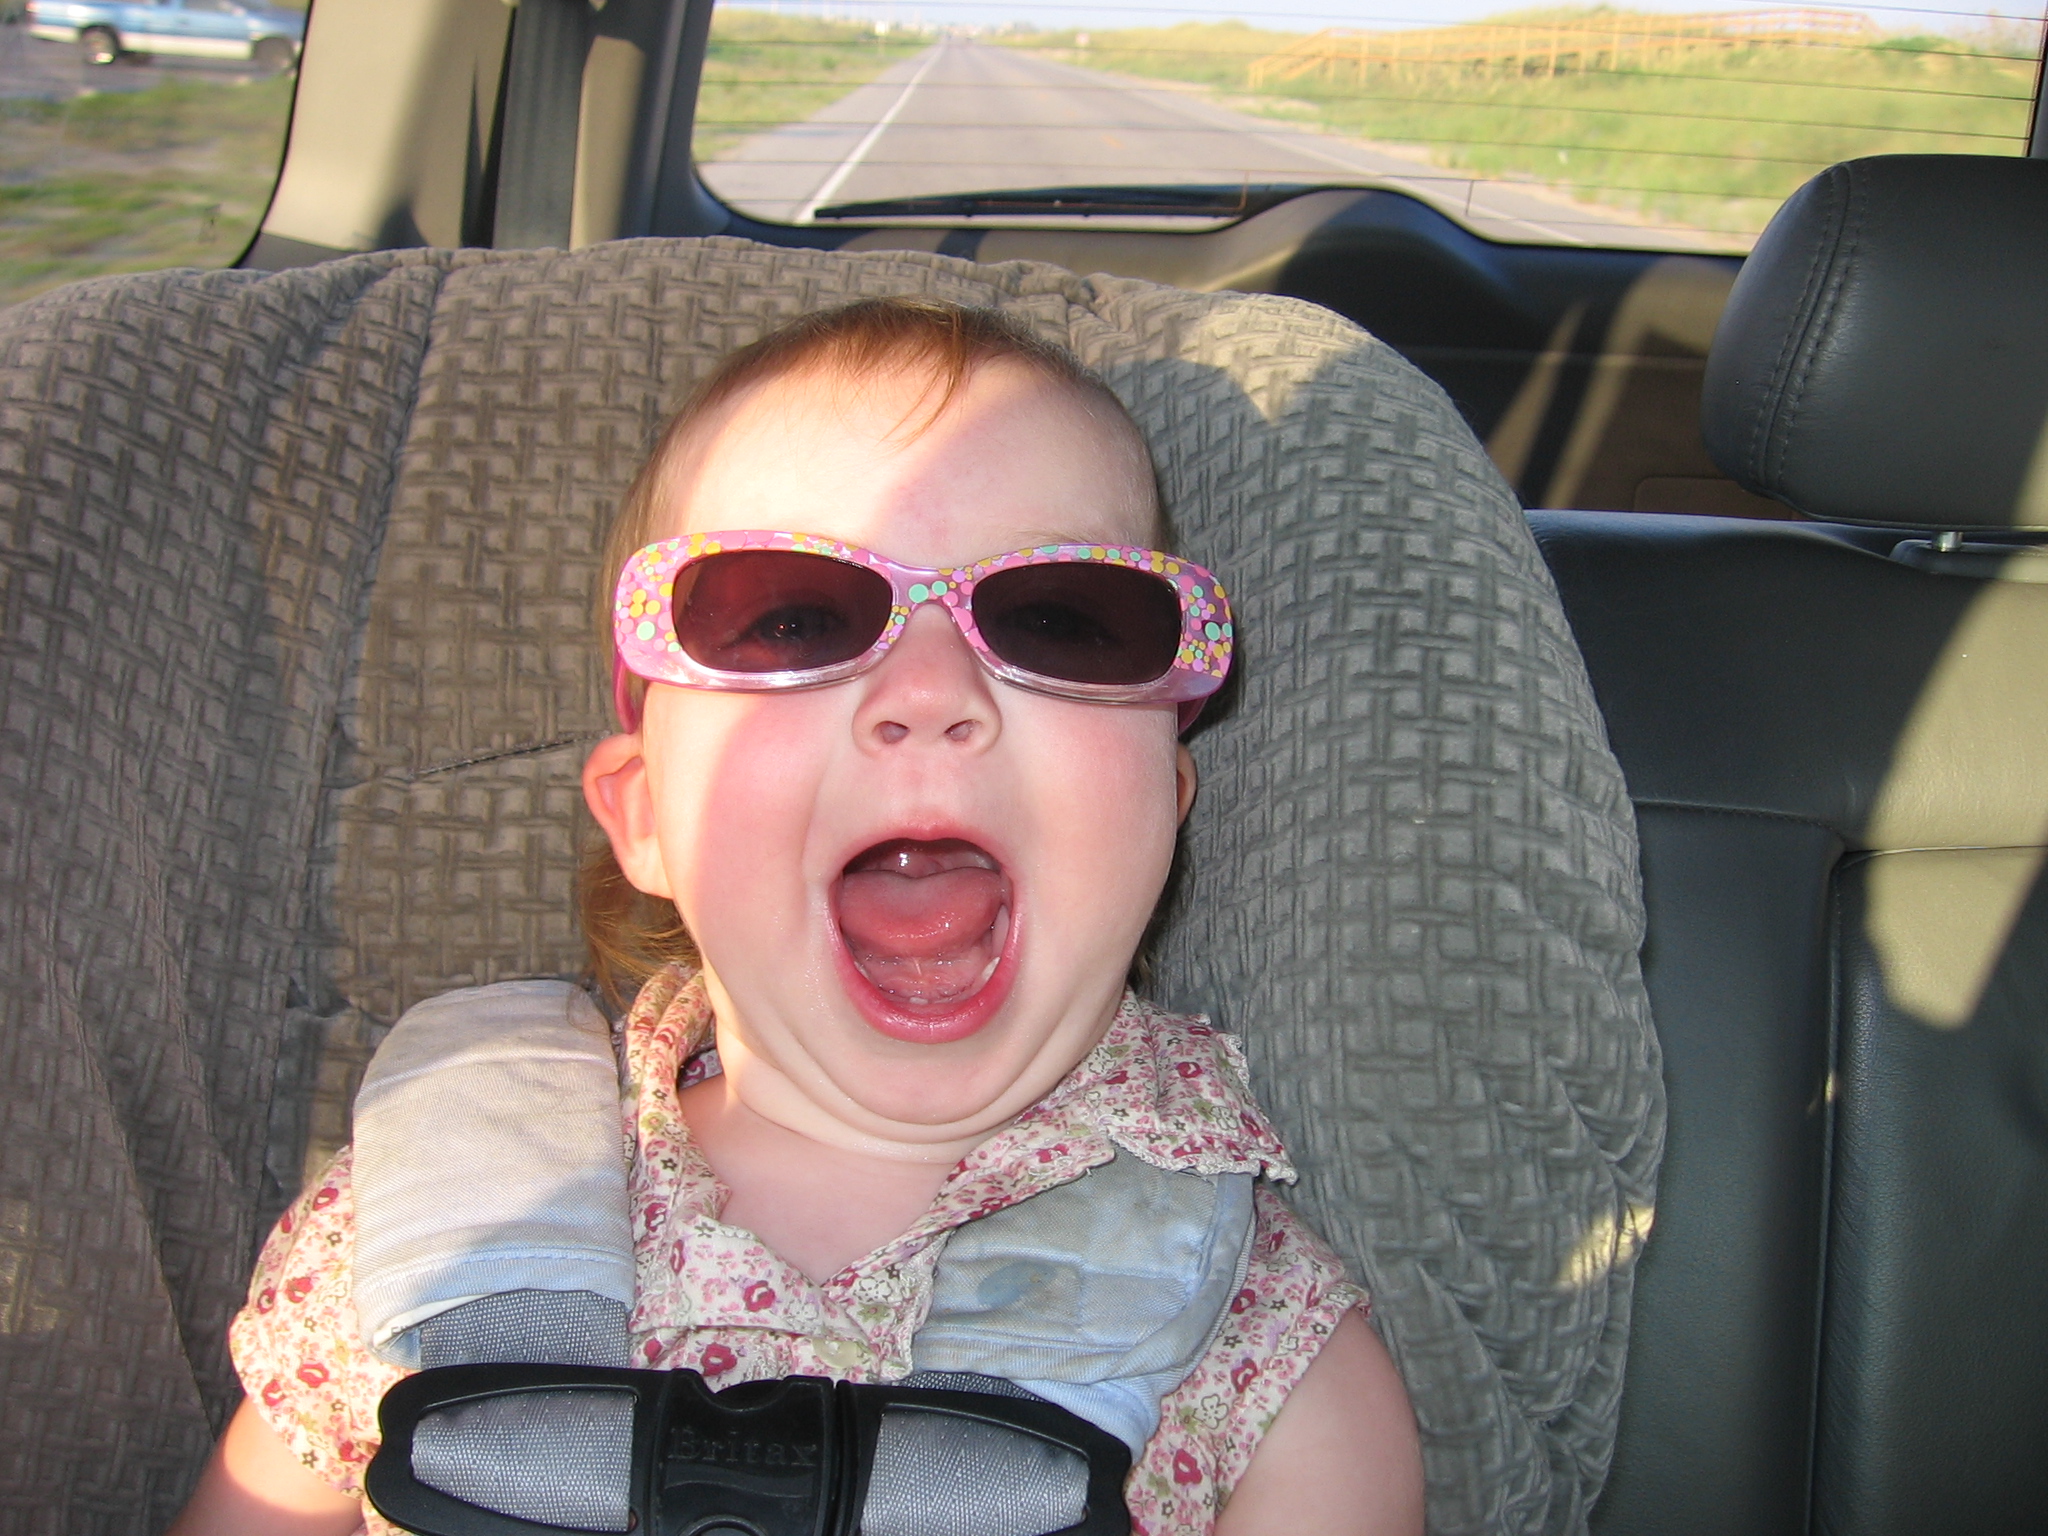 the baby is dressed in sunglasses in the car